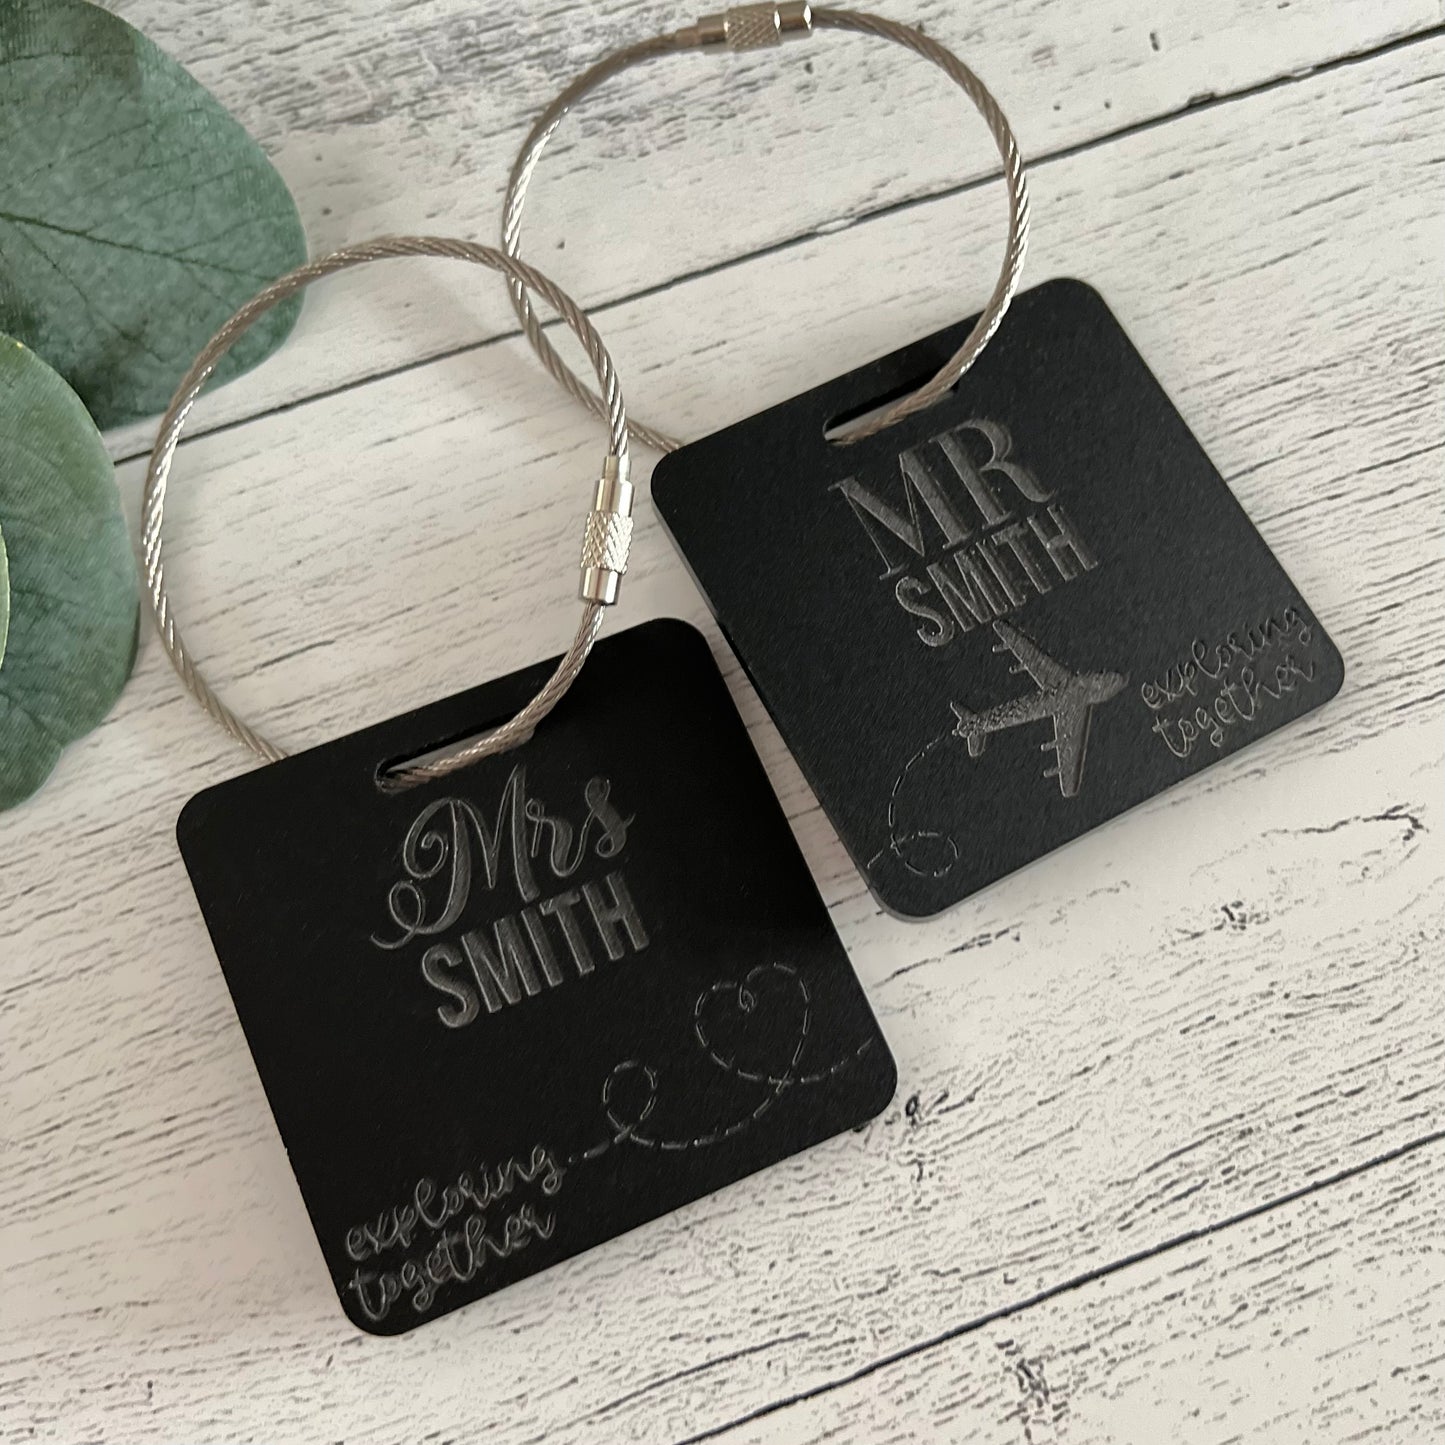 Personalized Mr & Mrs Luggage Tag